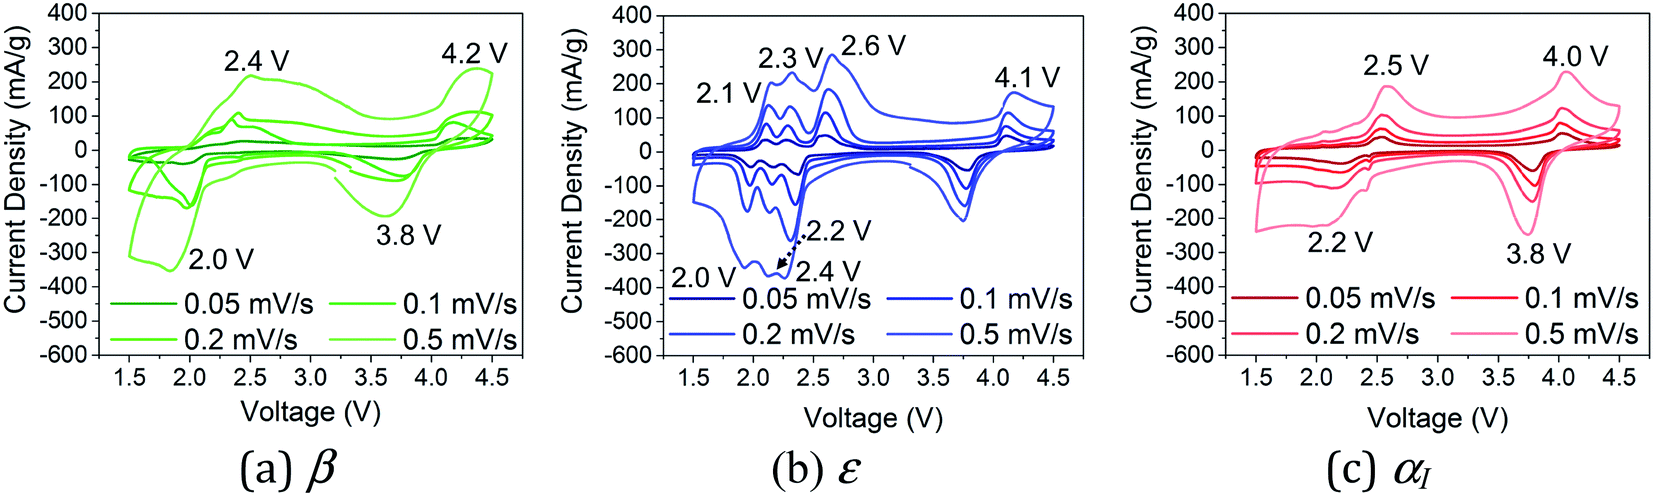 Comparison Of The Polymorphs Of Vopo4 As Multi Electron Cathodes For Rechargeable Alkali Ion Batteries Journal Of Materials Chemistry A Rsc Publishing